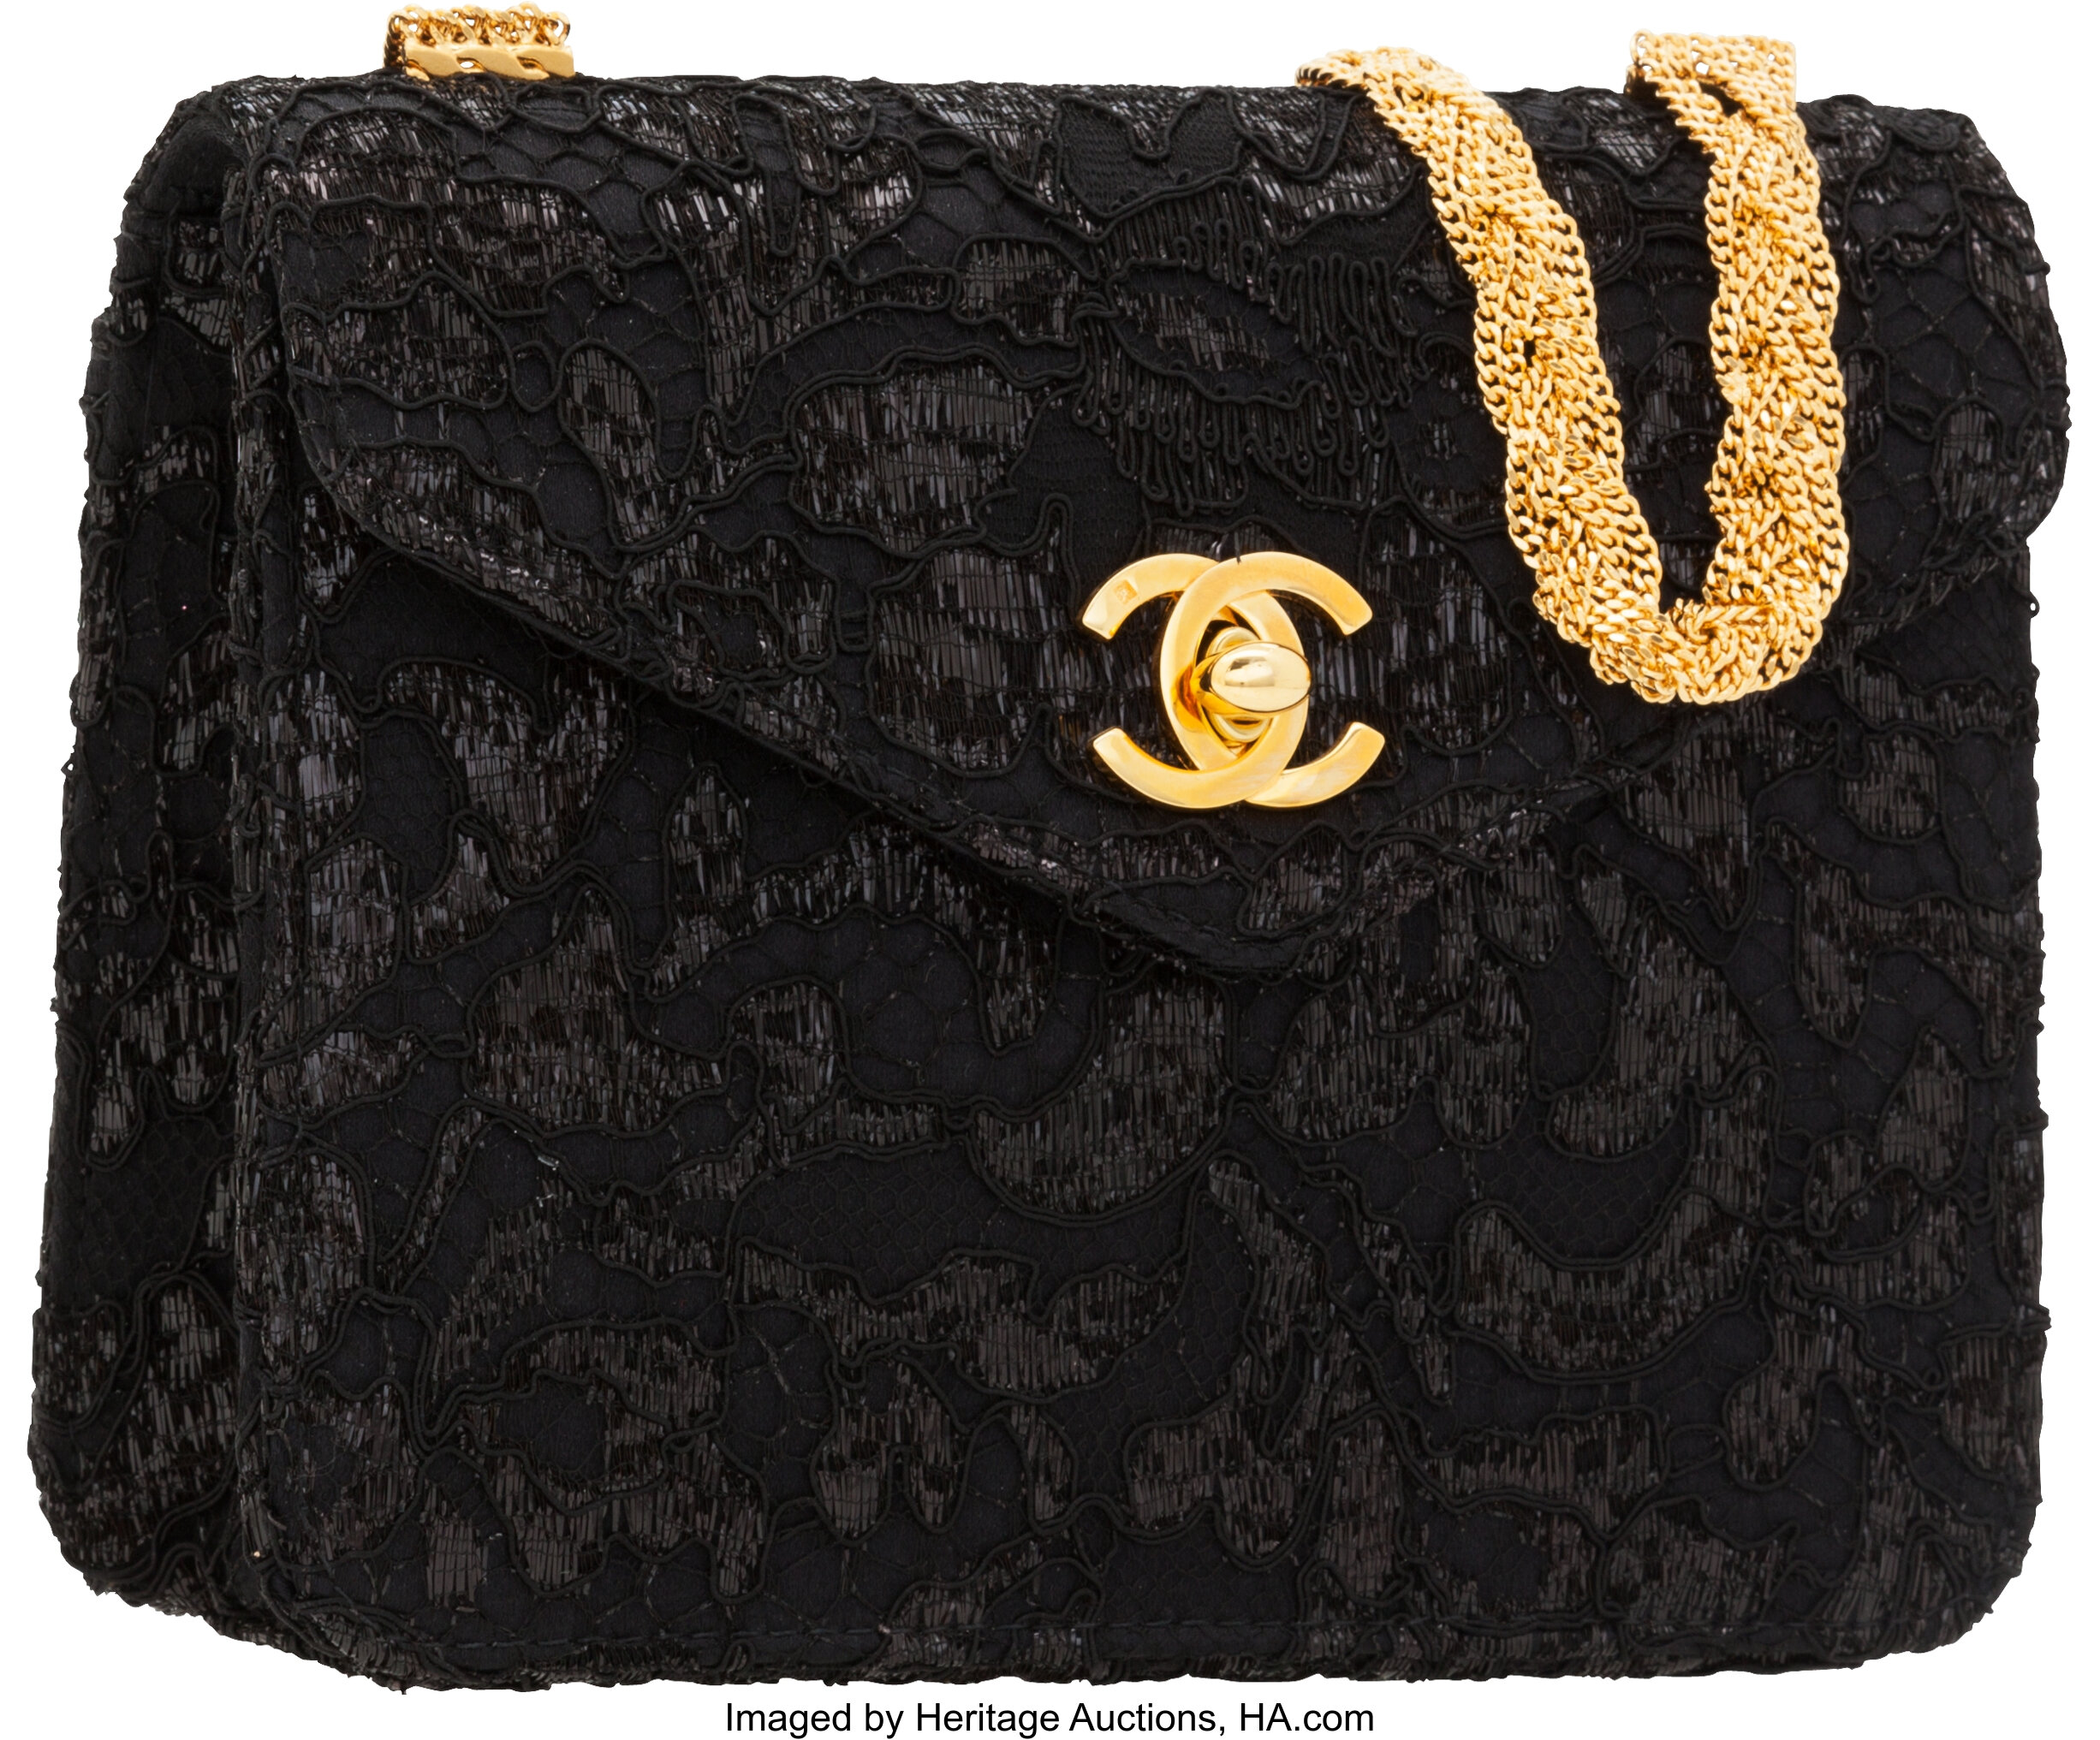 Sold at Auction: CHANEL LOGO EMBROIDERED CHAIN LINK LEATHER HANDBAG